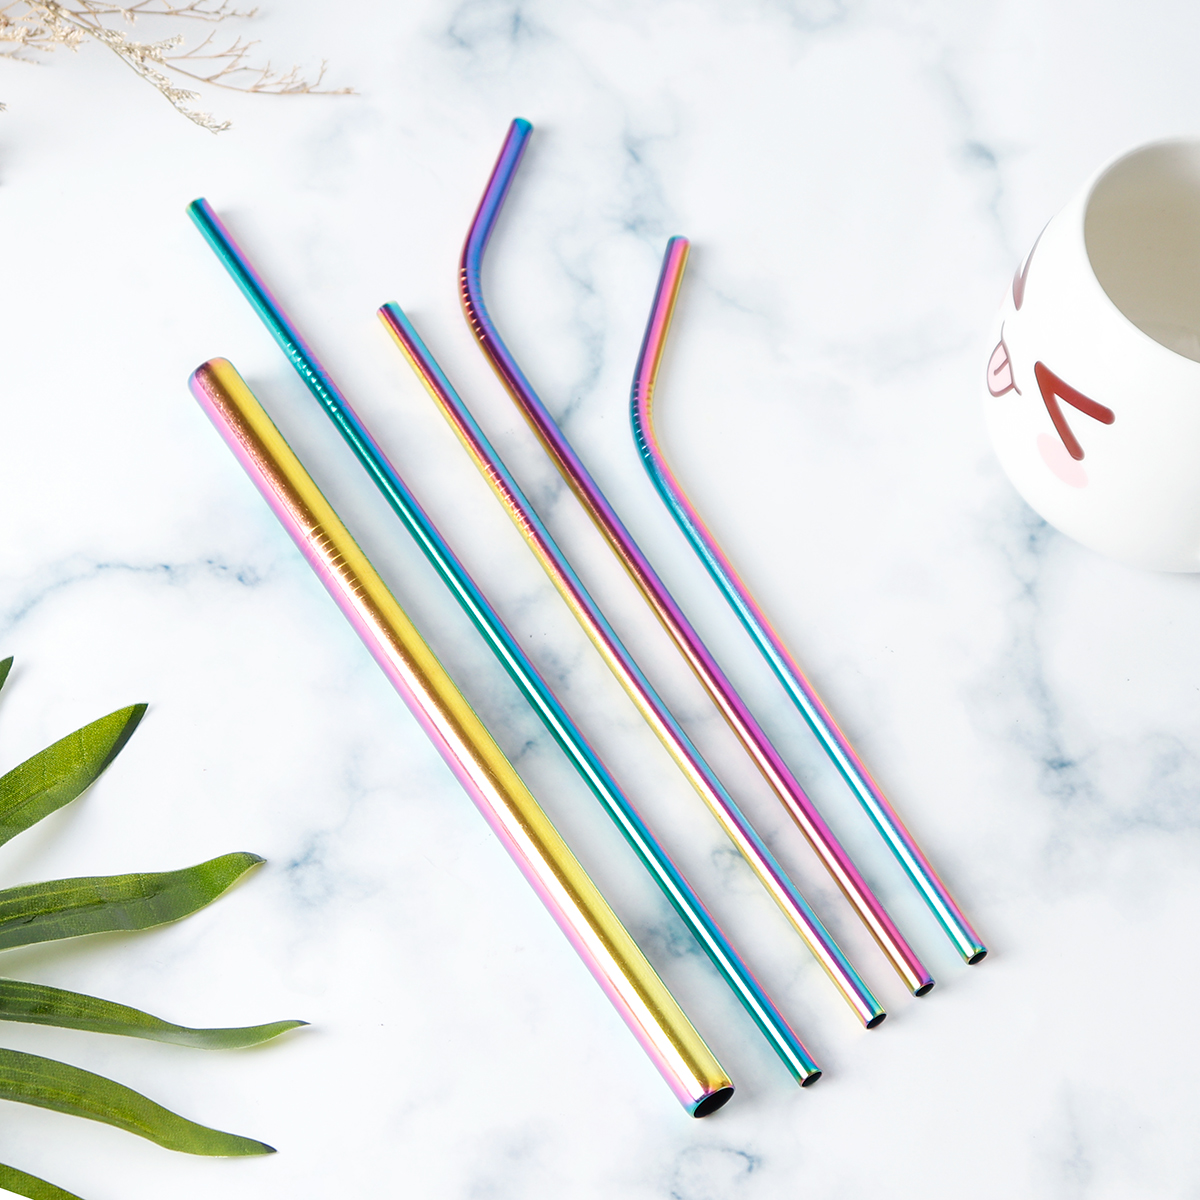 Portable-Metal-Straw-Set-304-Stainless-Steel-Straws-Reusable-Metal-Drinking-Straws-With-Cleaning-Bru-1532046-8